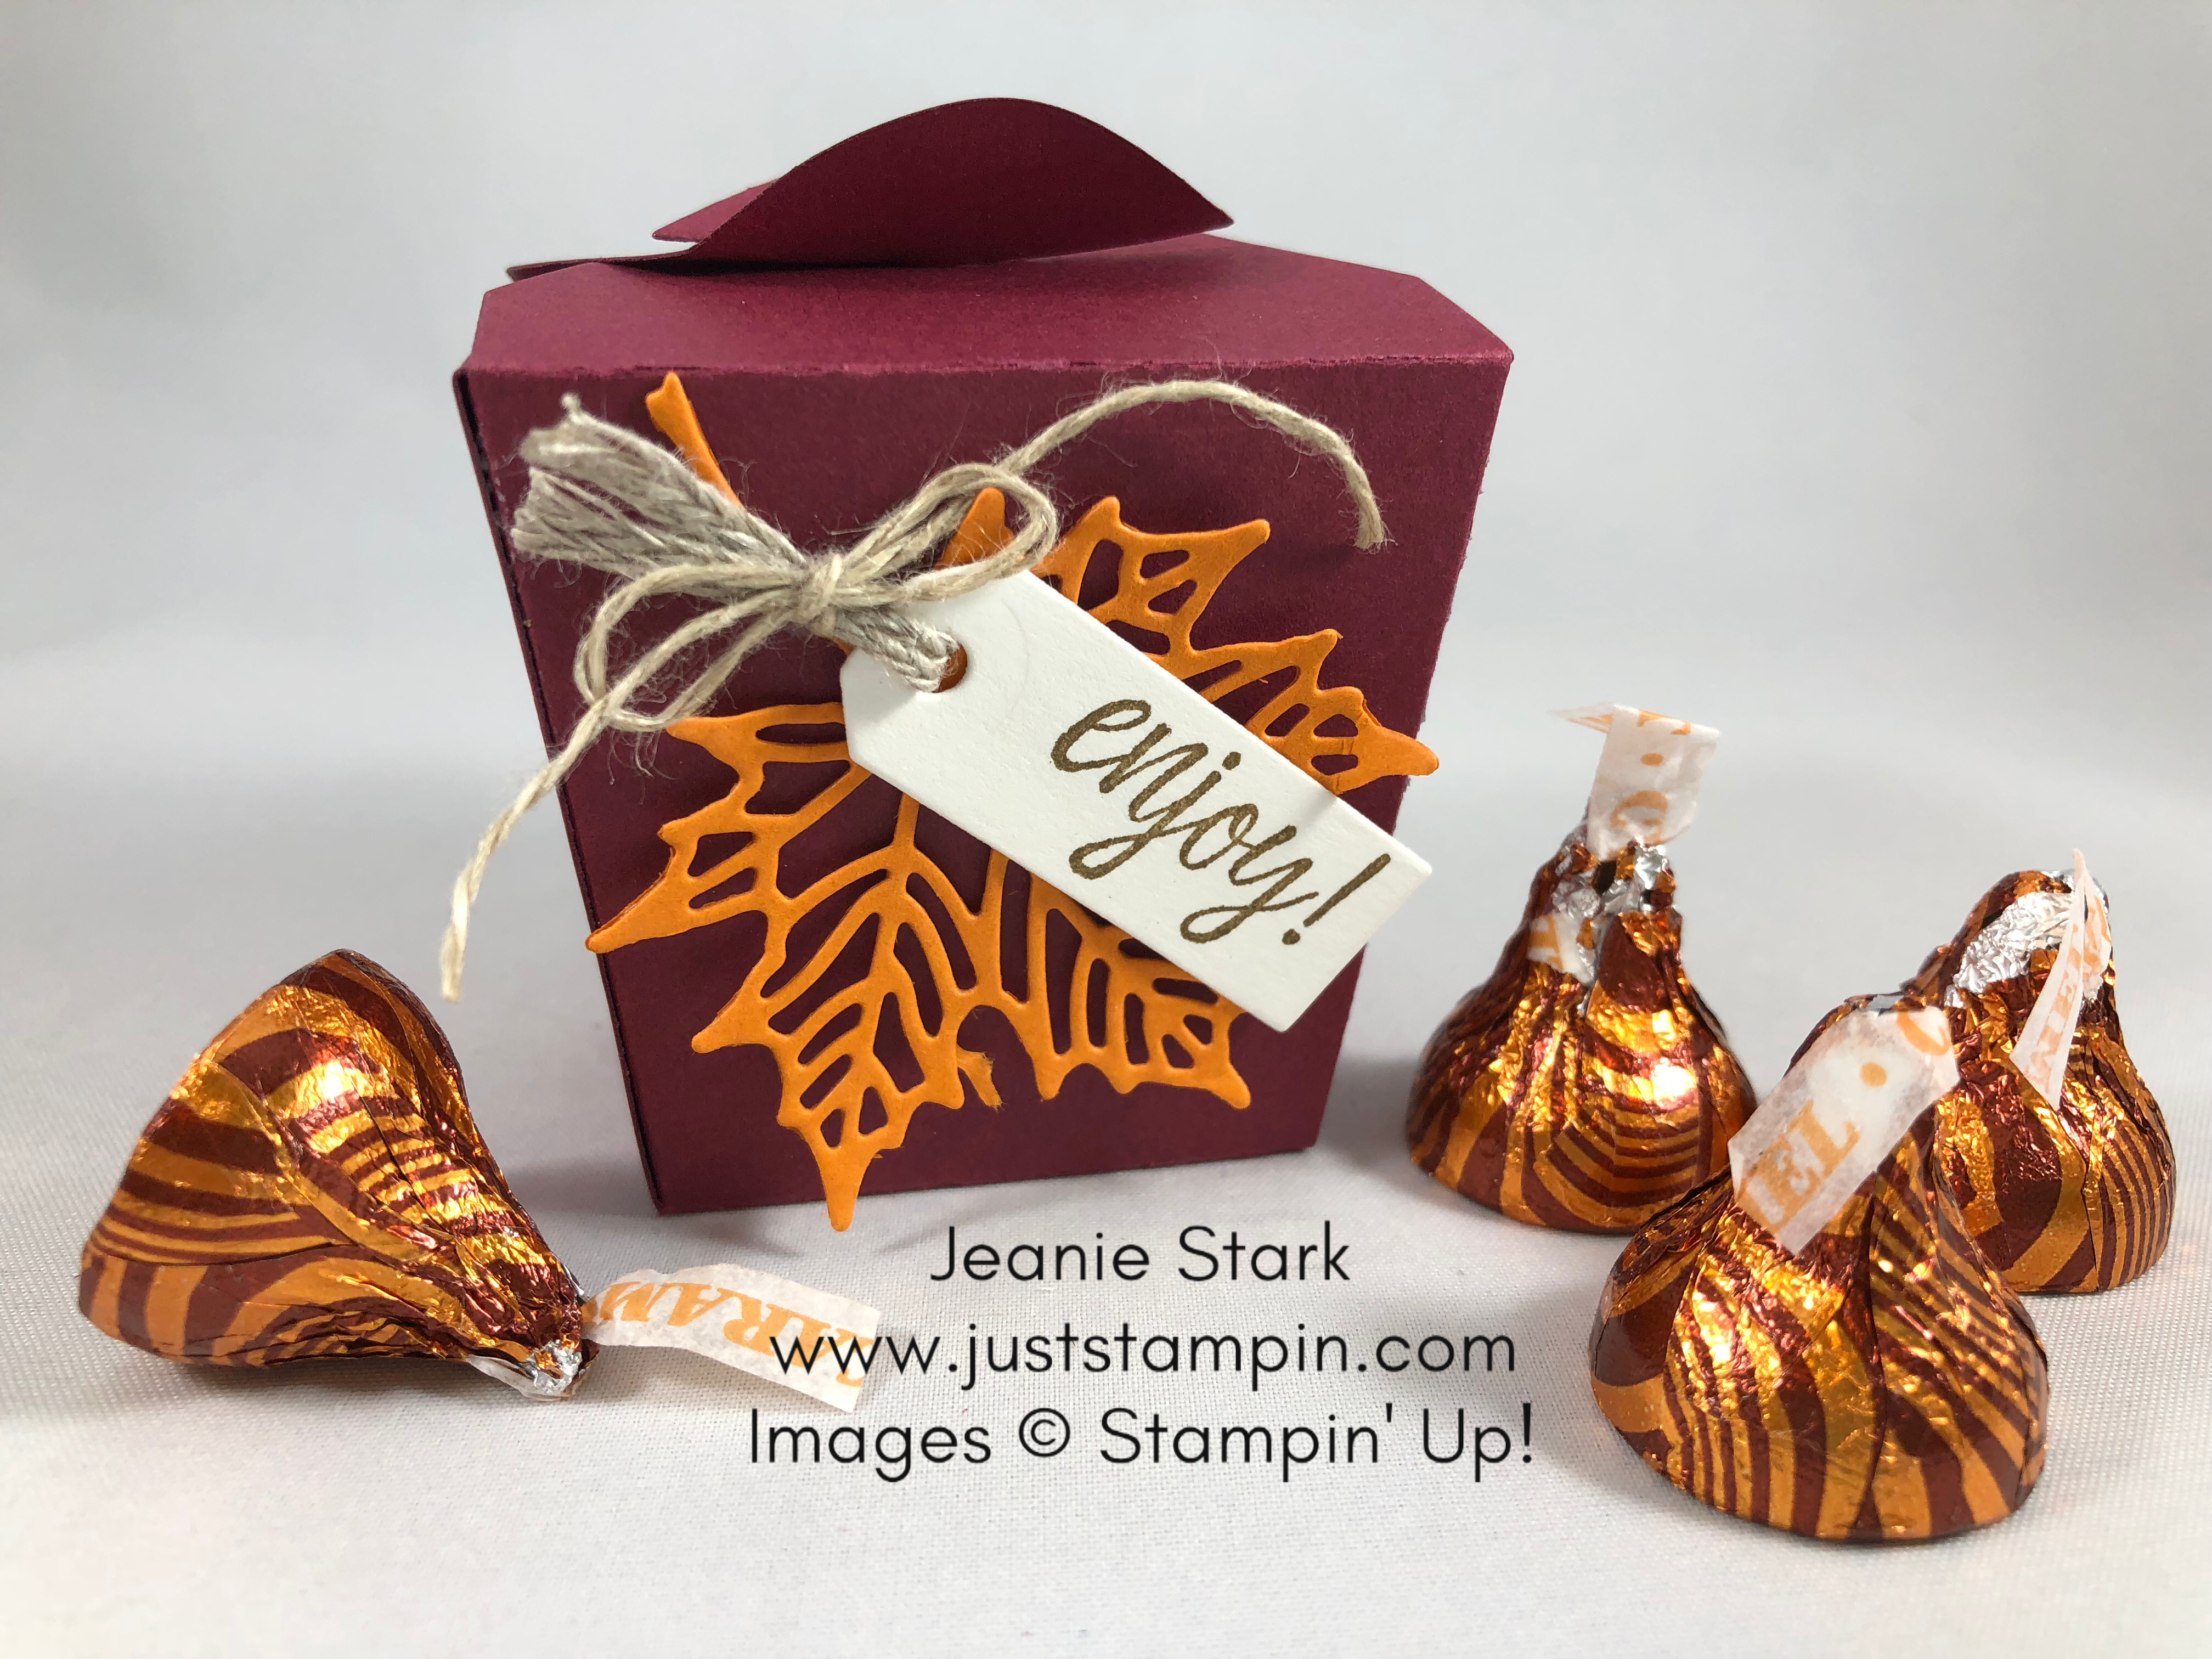 Stampin Up Takeout Treats candy favors for Fall or Thanksgiving - Jeanie Stark StampinUp